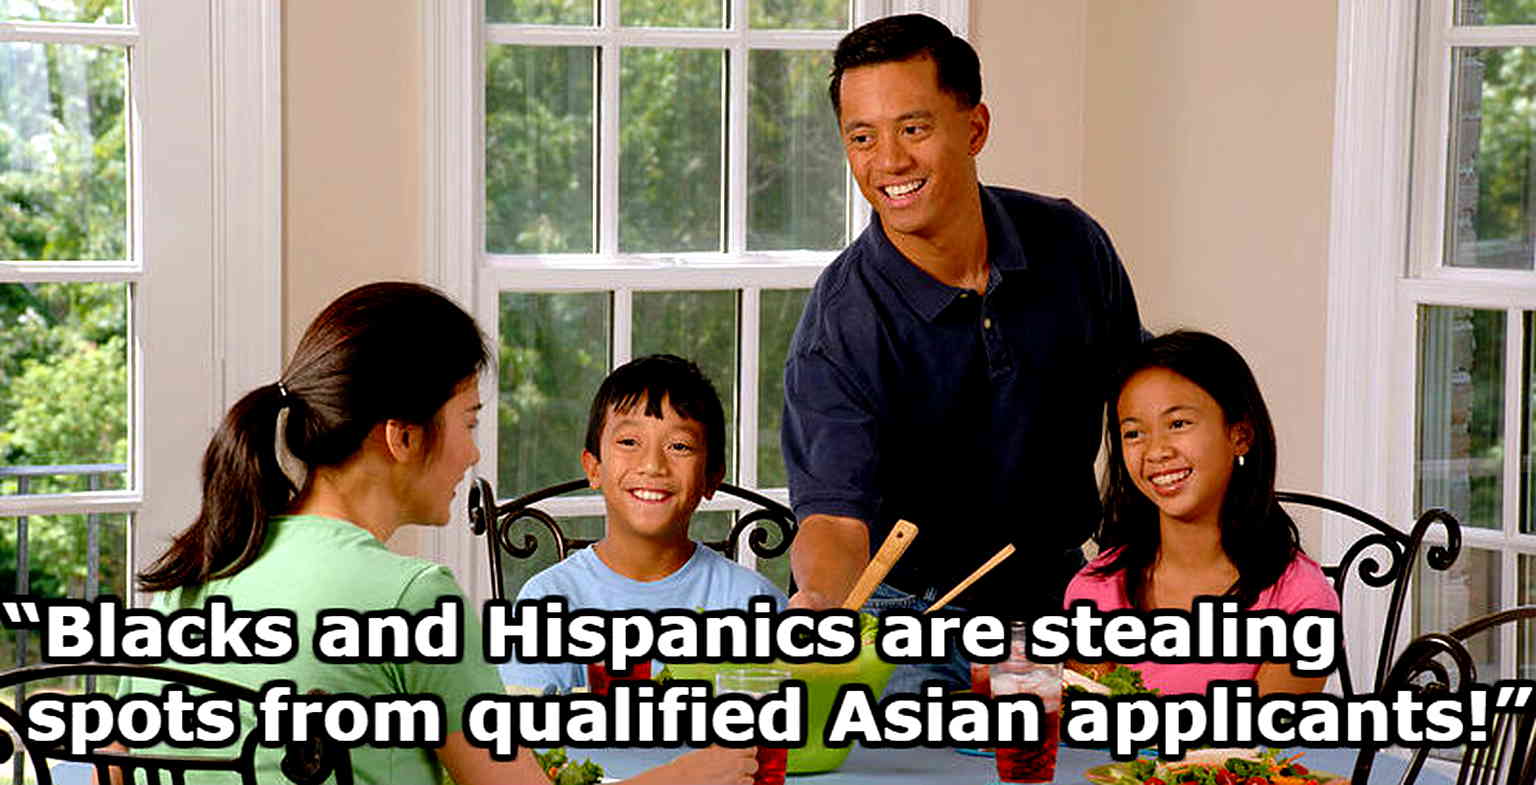 What to Say When Your Racist Asian Uncle Complains About ‘Unqualified Blacks Stealing Our Spots’